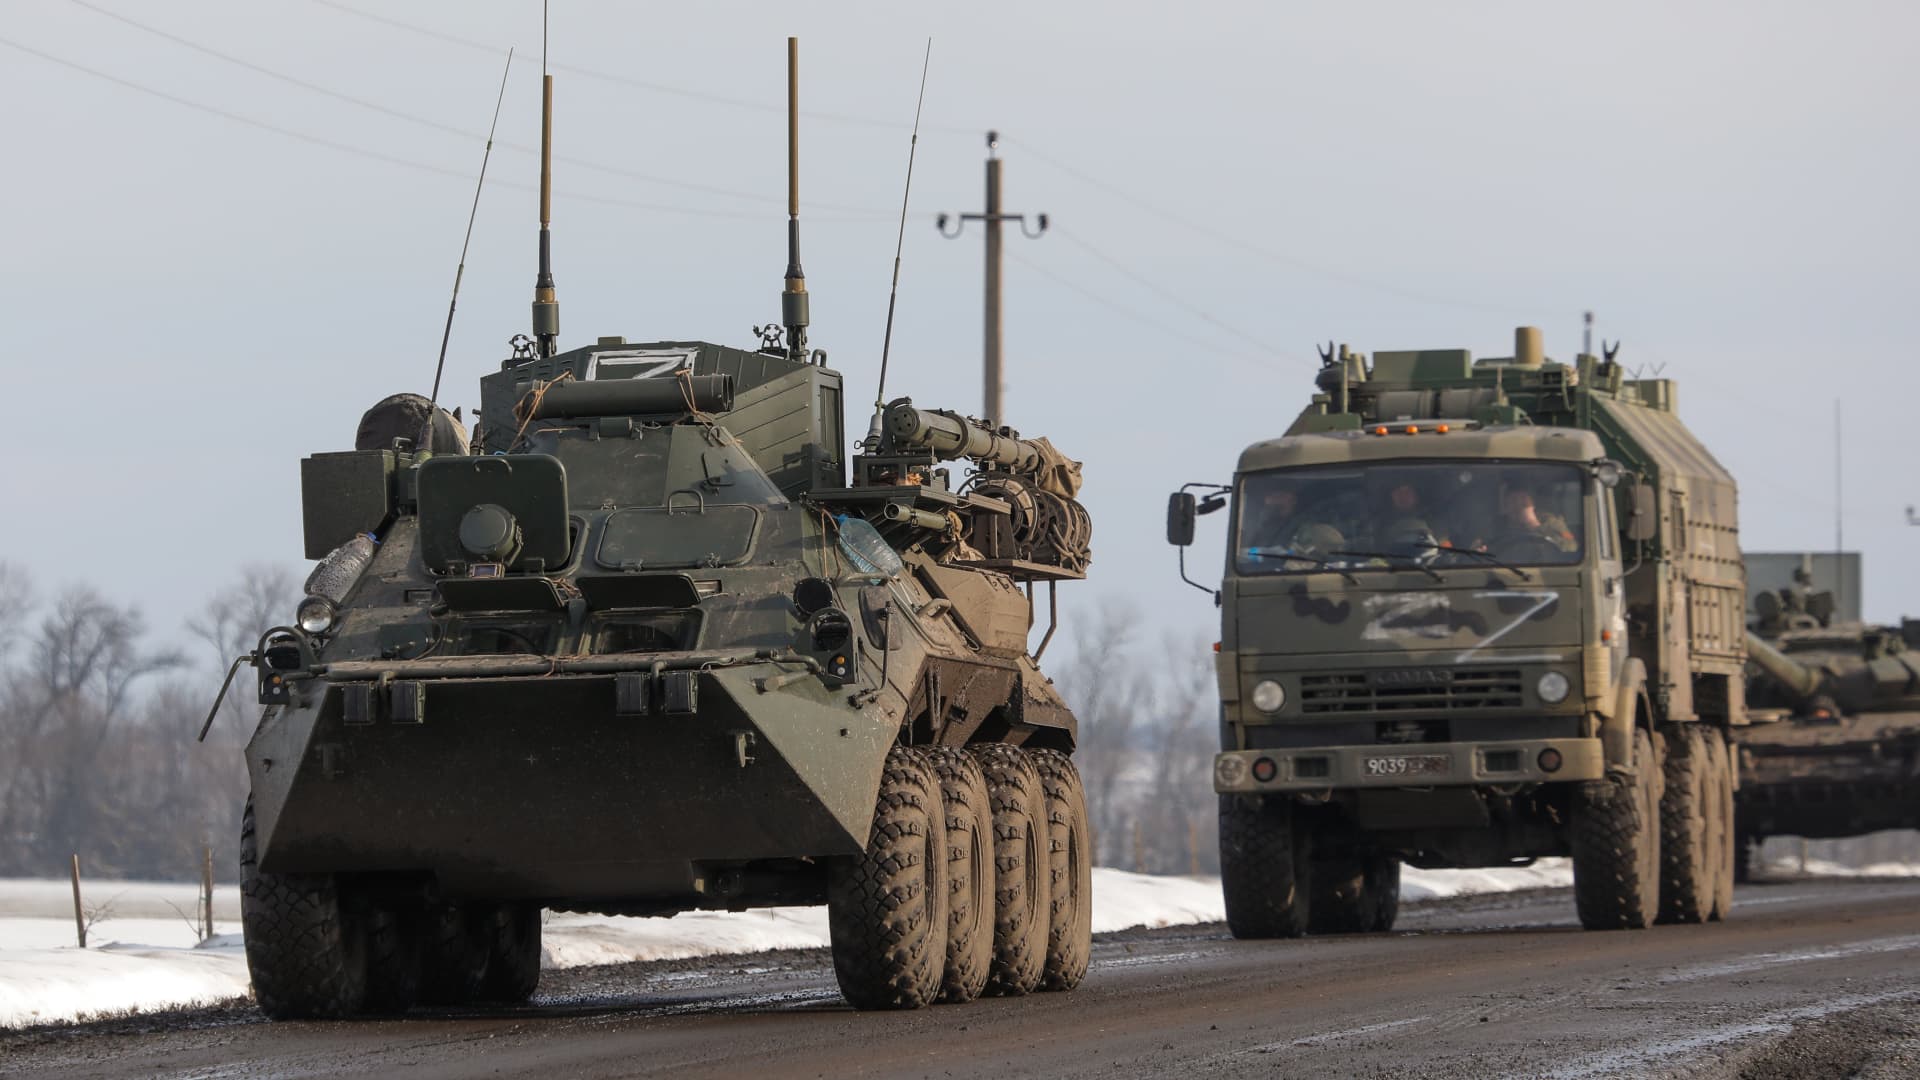 A column of Russian military vehicles is seen near the village of Oktyabrsky, Belgorod Region, near the Russian-Ukrainian border. Early on 24 February, Russia's President Putin announced his decision to launch a special military operation after considering requests from the leaders of the Donetsk People's Republic and the Lugansk People's Republic.